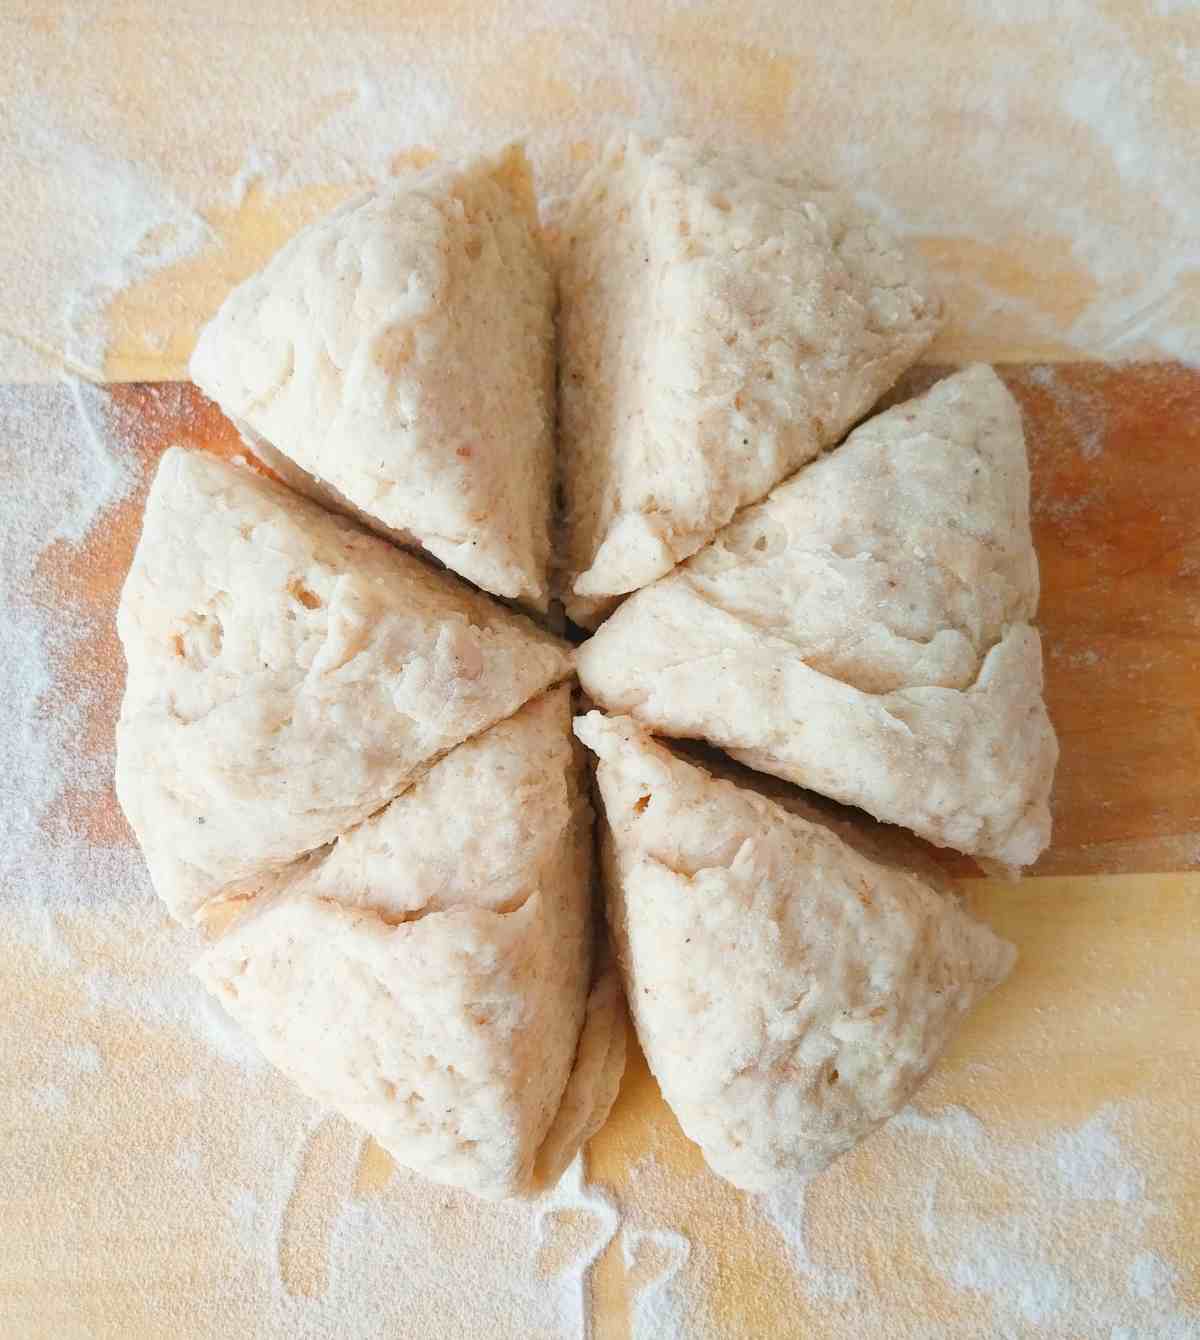 The dough ball divided using a bench scraper into six equal pieces. 